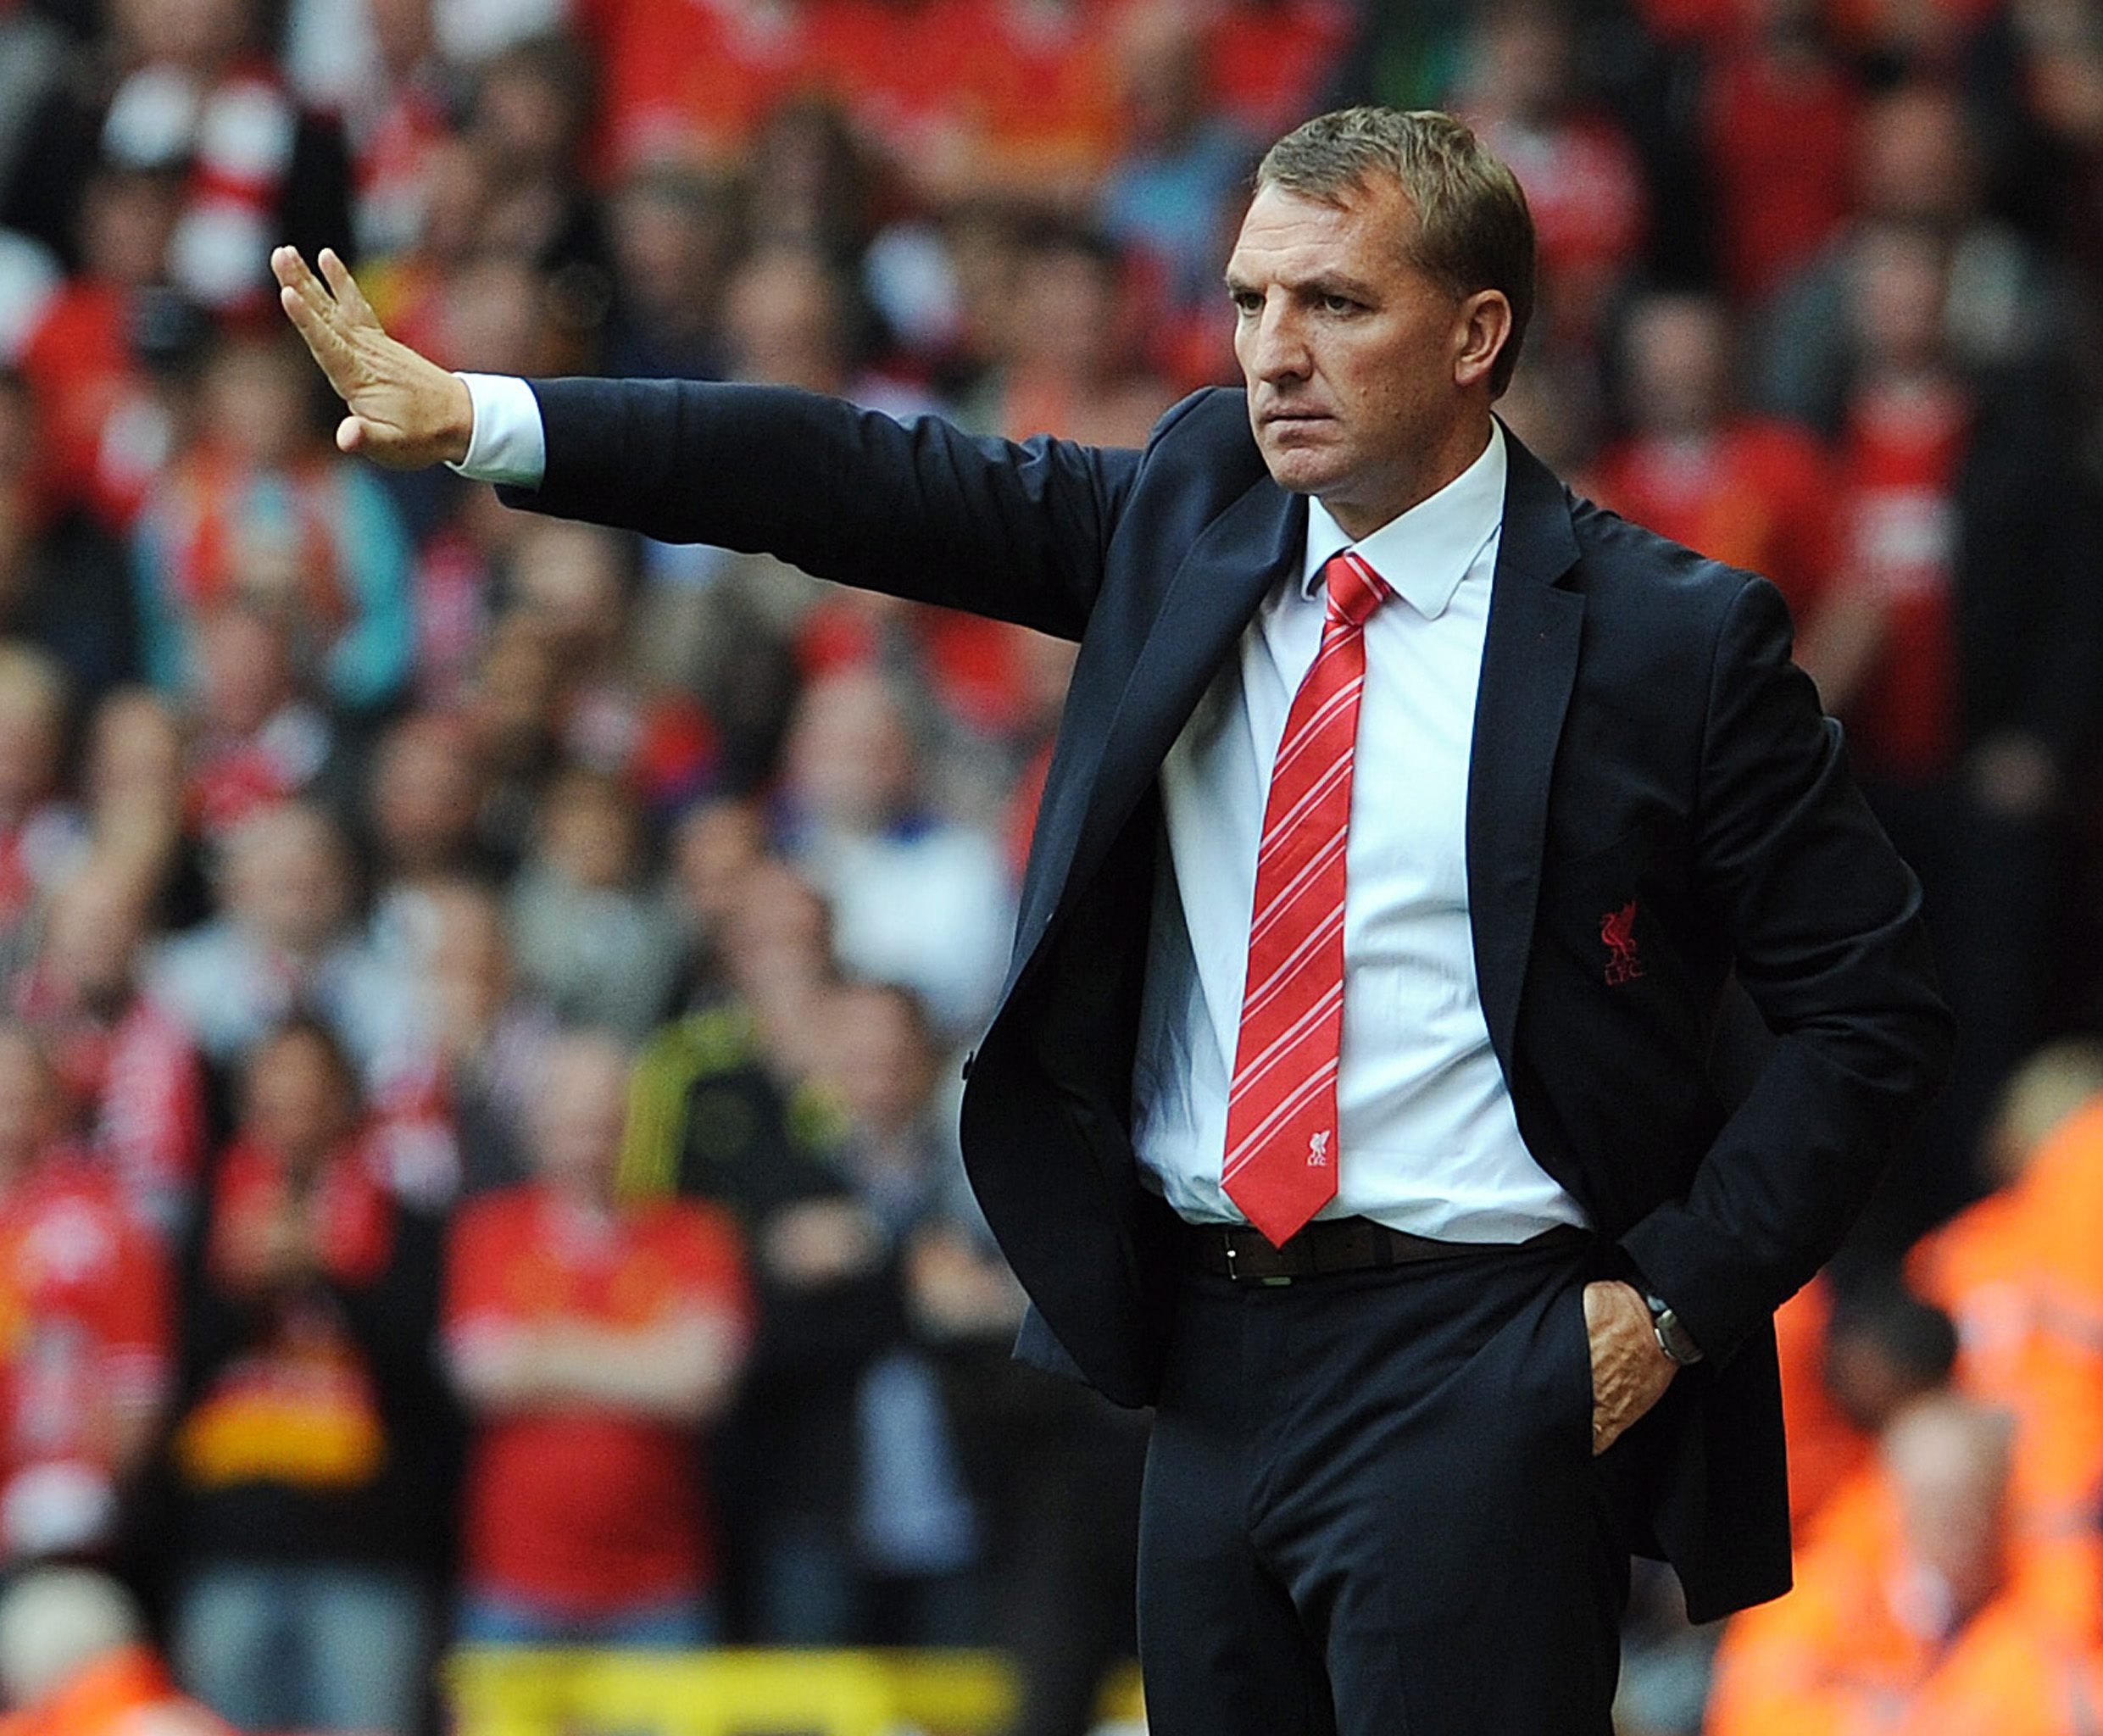 Liverpool manager Brendan Rodgers has faith that the team will survive without prolific scorer Luis Suarez. Photo: EPA